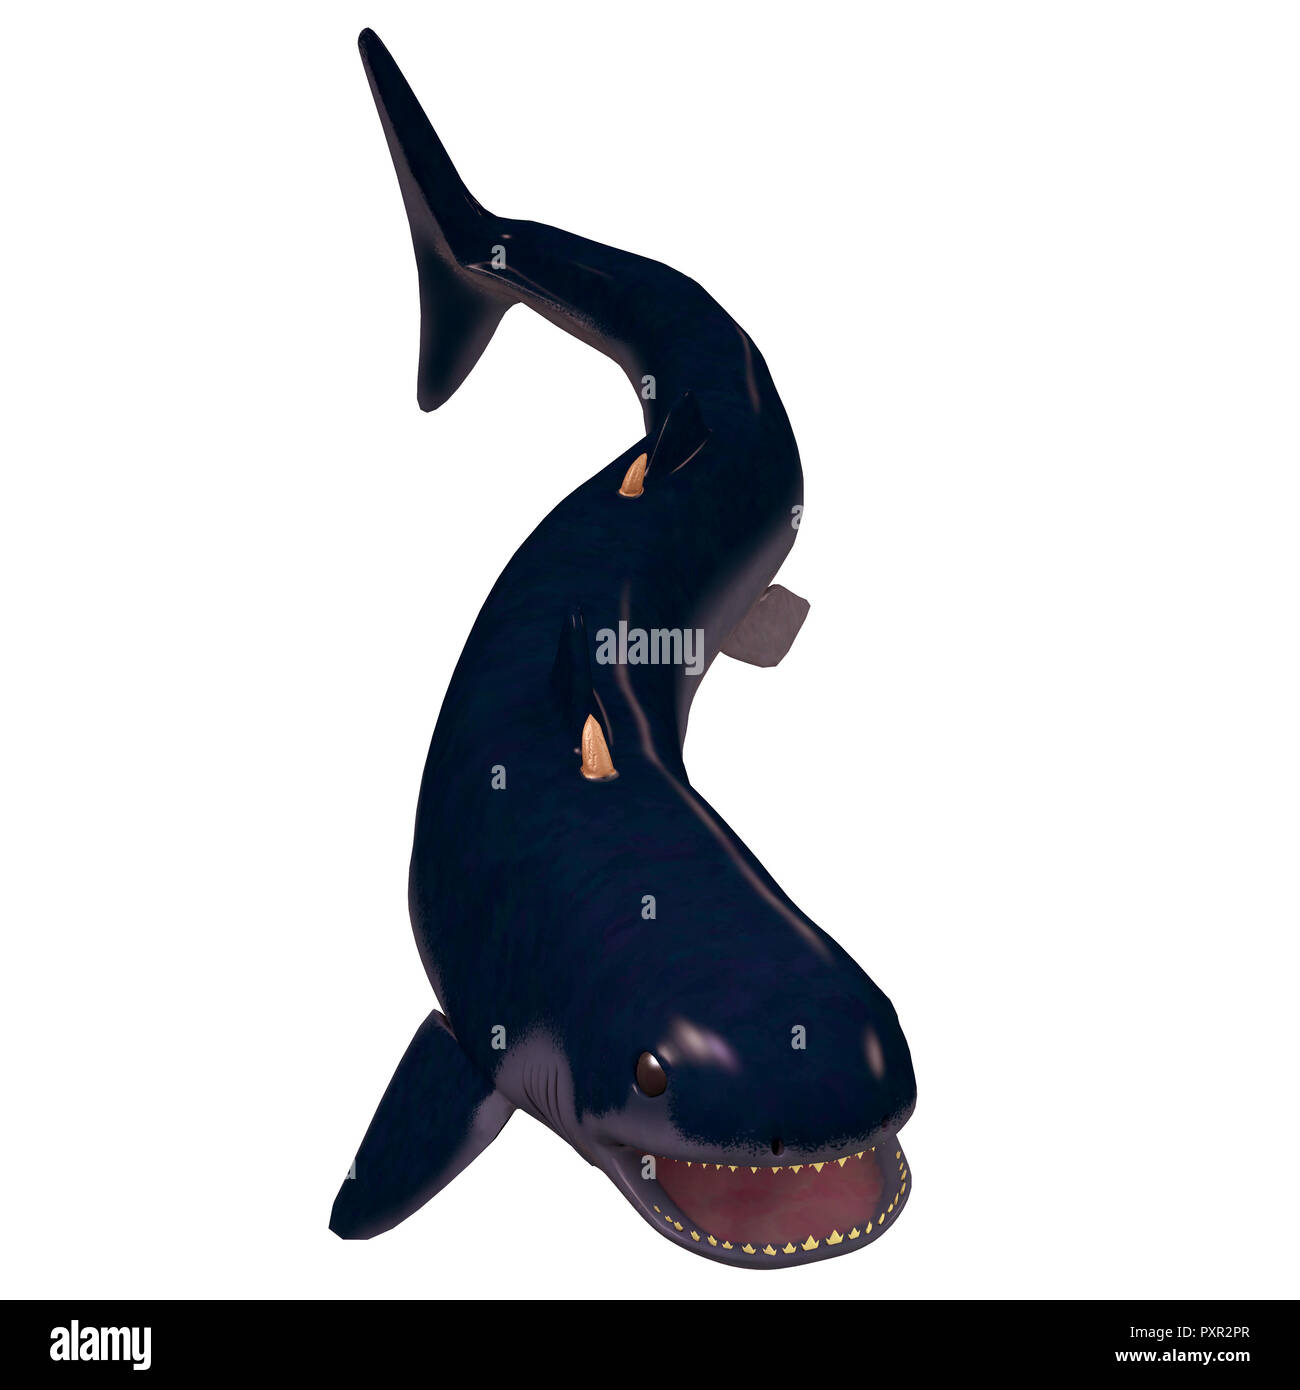 Devonian Cladoselache Shark -The Cladoselache was a carnivorous early shark that lived in the inland seas of North America during the Devonian Period. Stock Photo